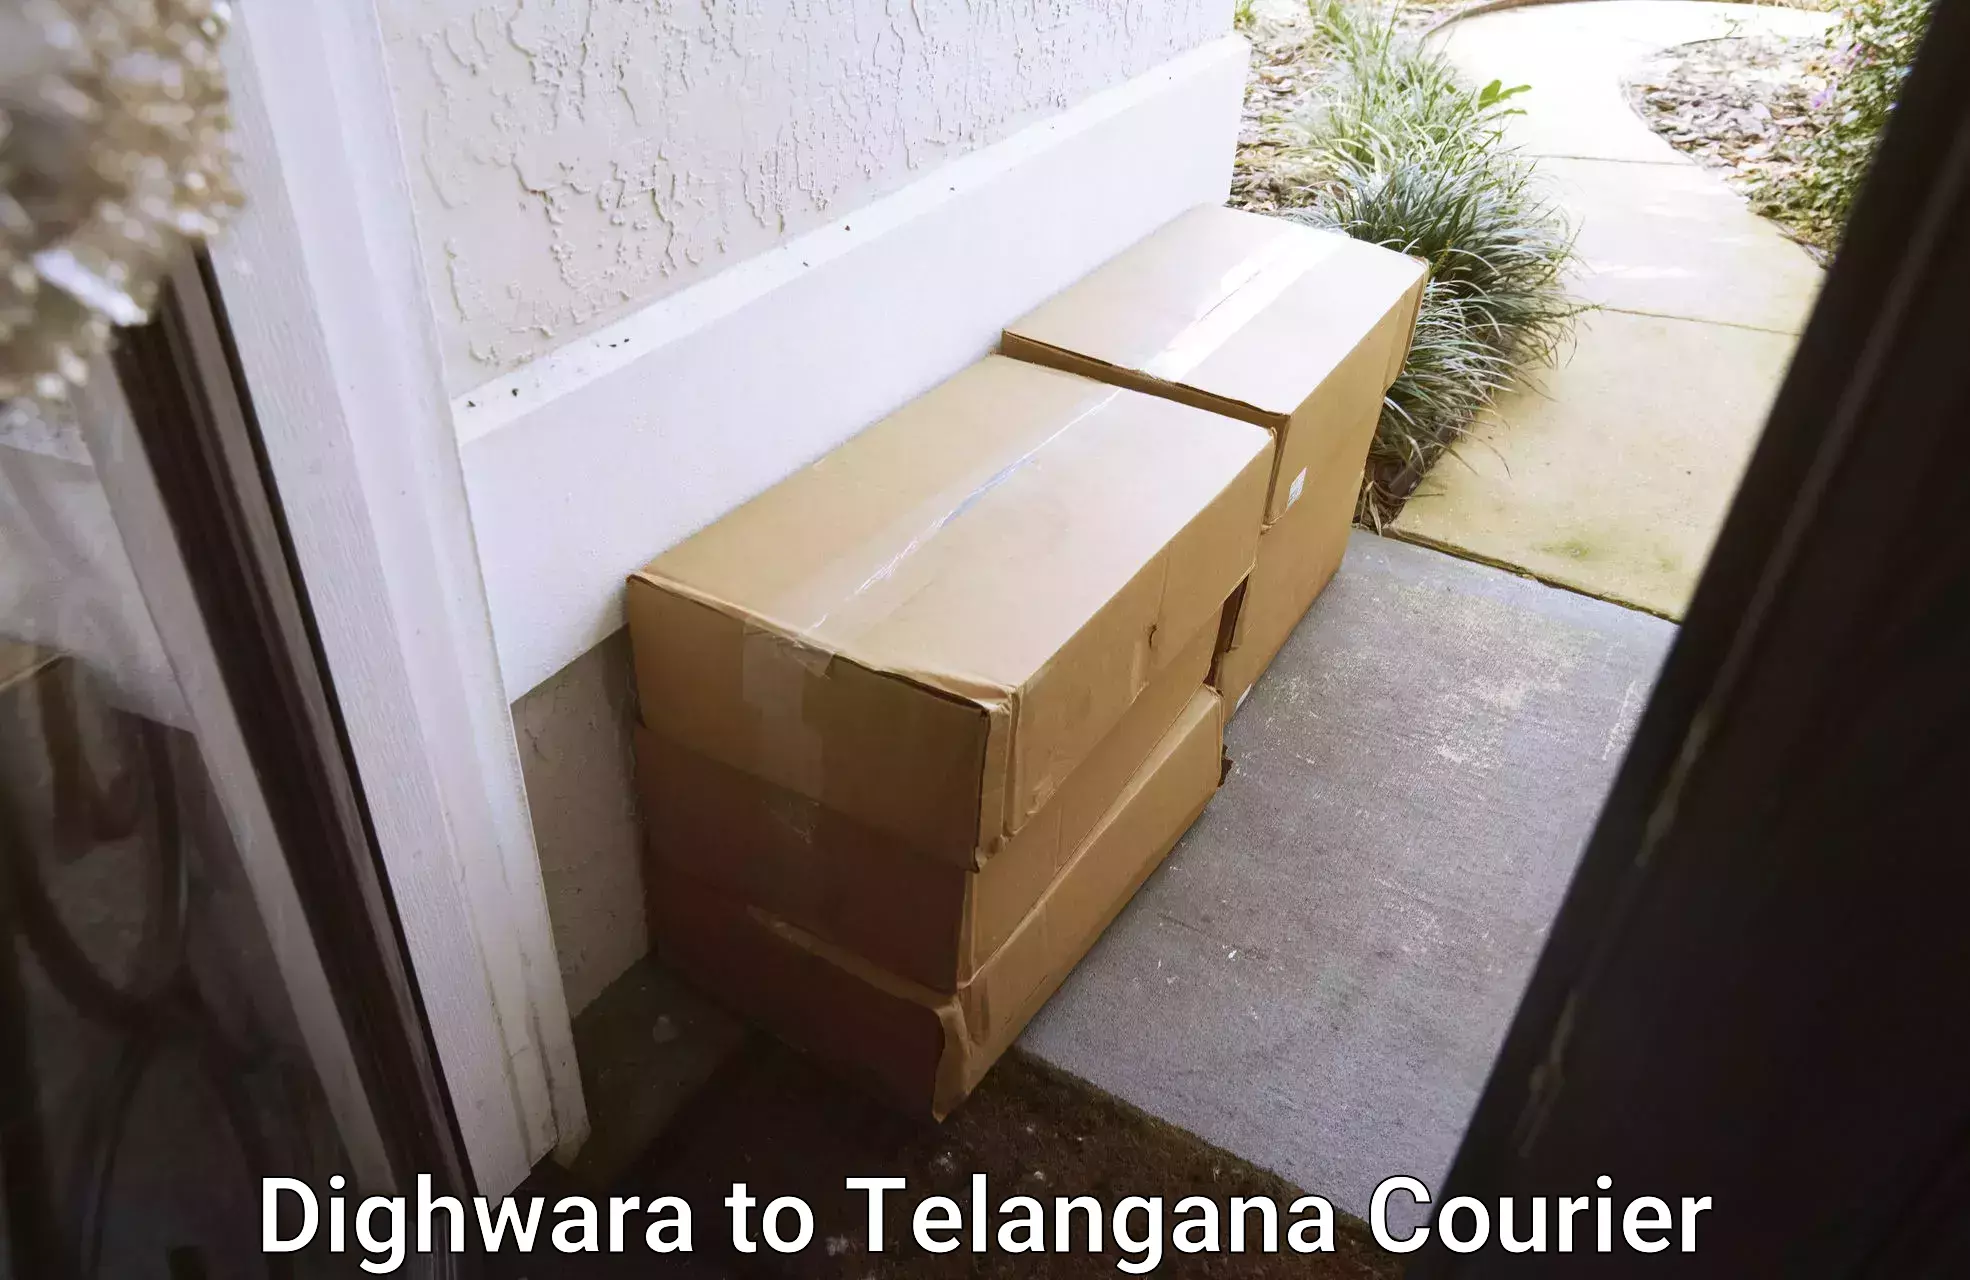 Trusted relocation experts Dighwara to Nizamabad